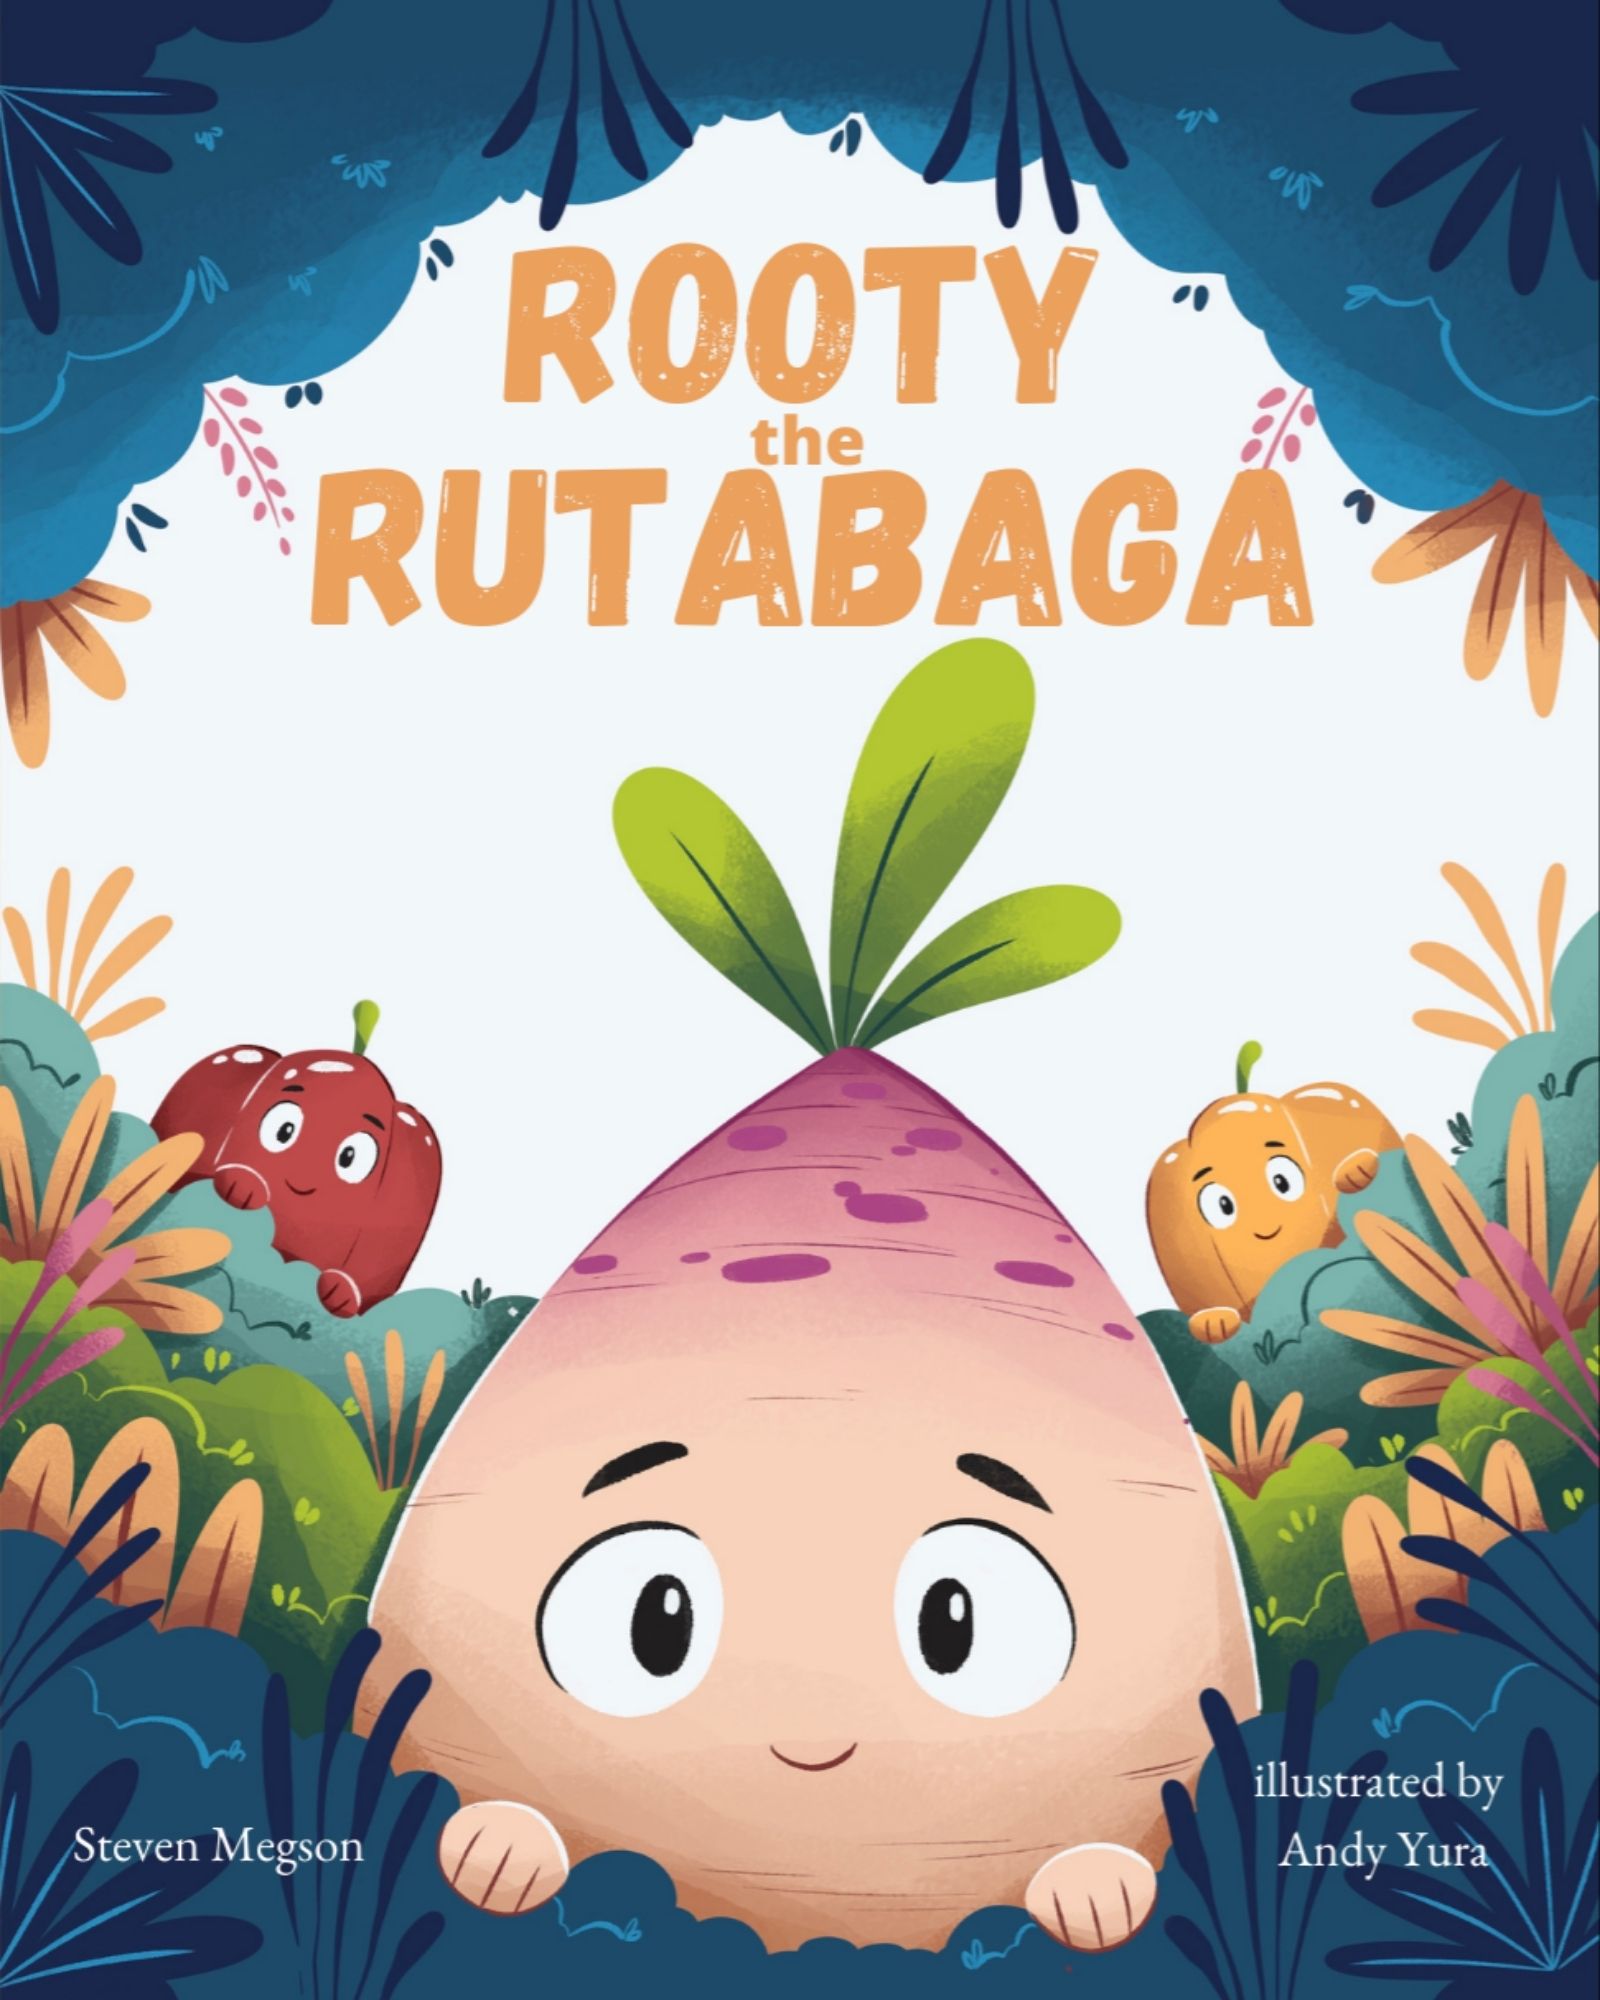 FREE: Rooty the Rutabaga by Steven Megson